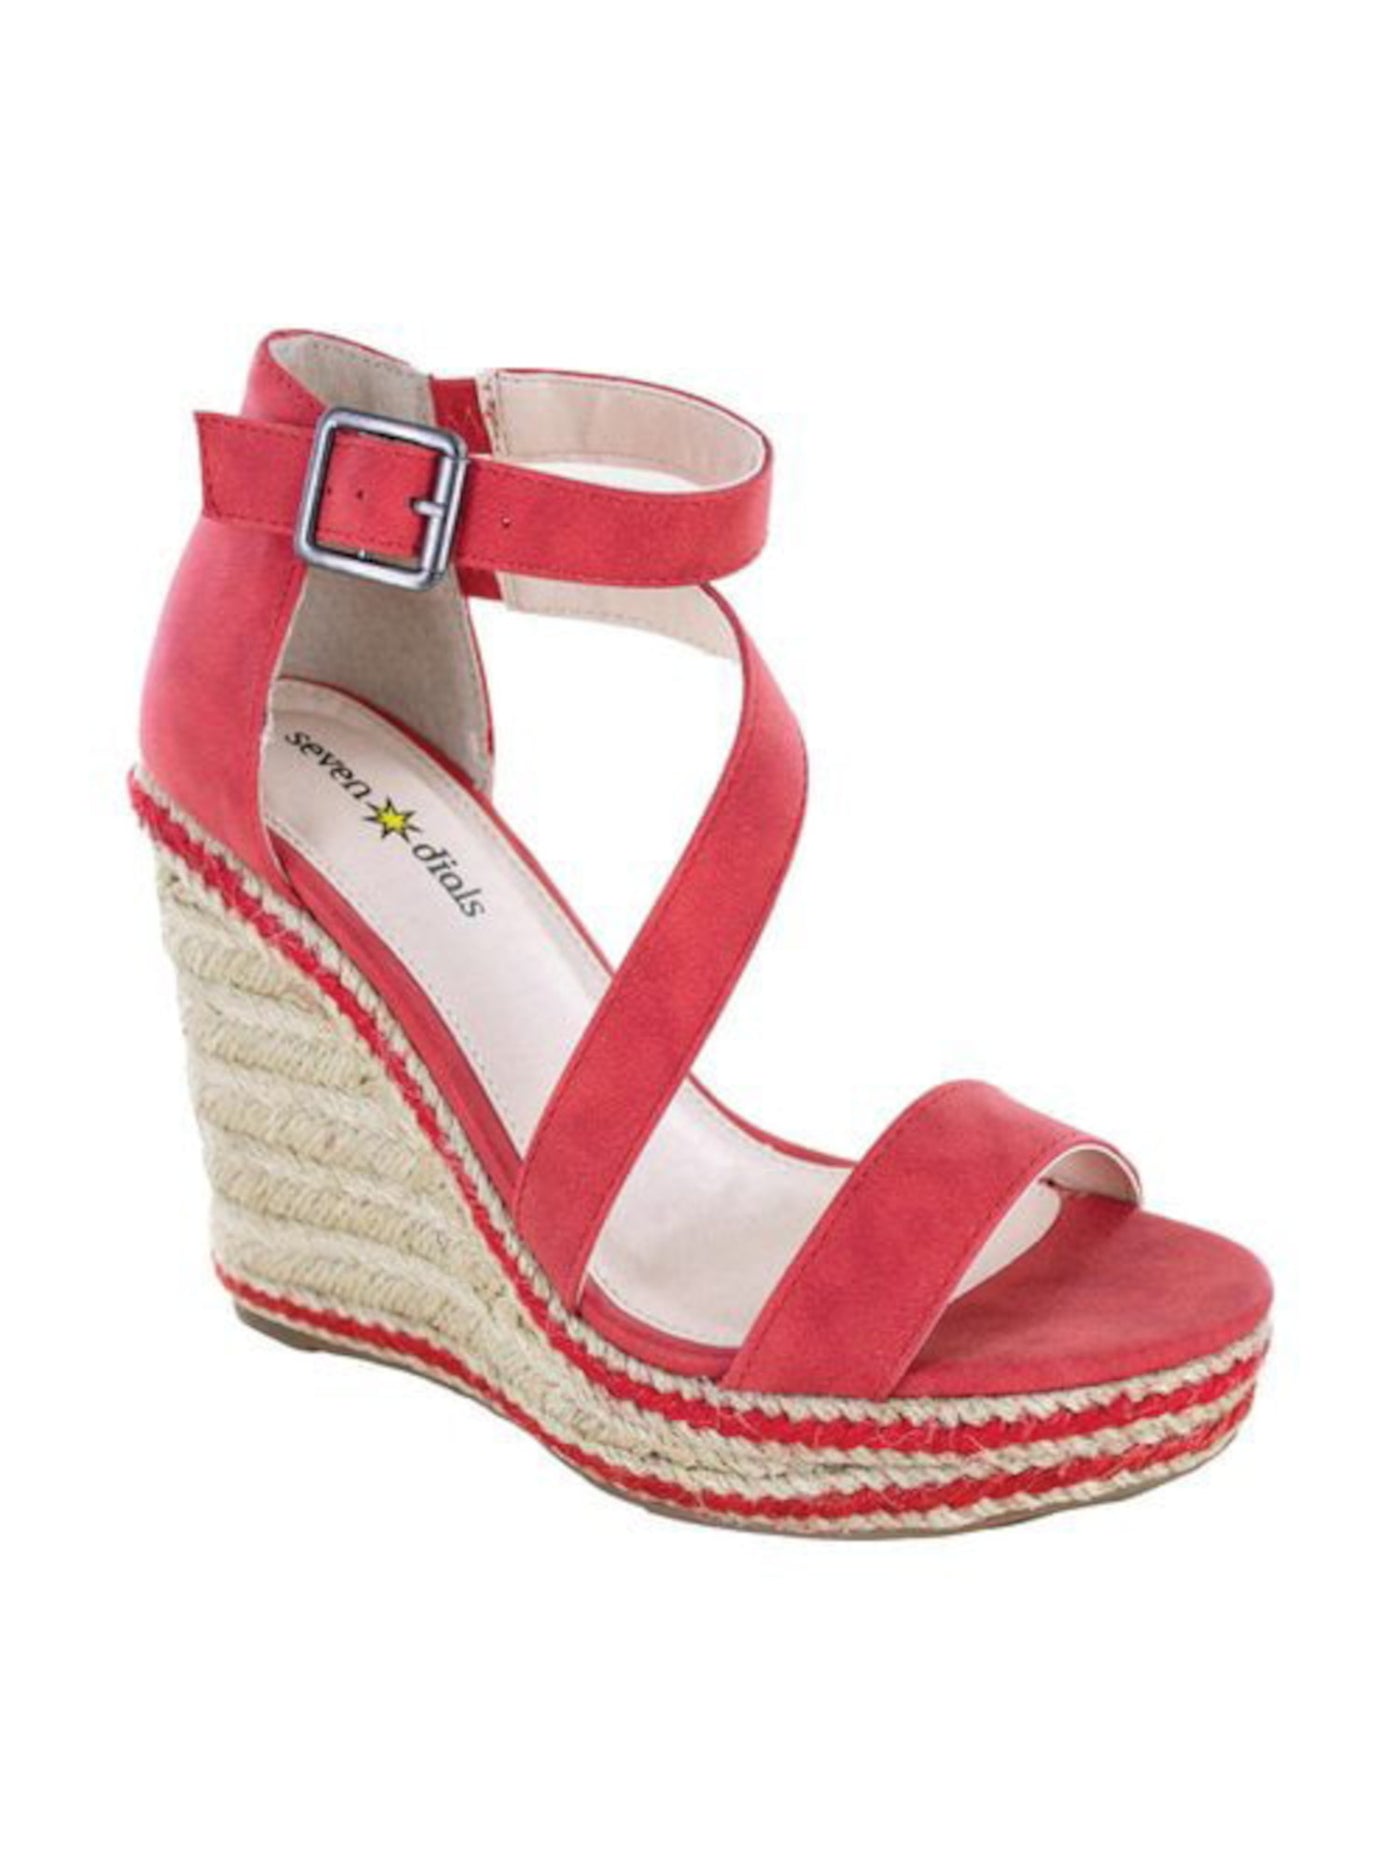 SEVEN DIALS Womens Red 1/2" Platform Adjustable Ankle Strap Berlina Round Toe Wedge Buckle Dress Espadrille Shoes 6.5 M